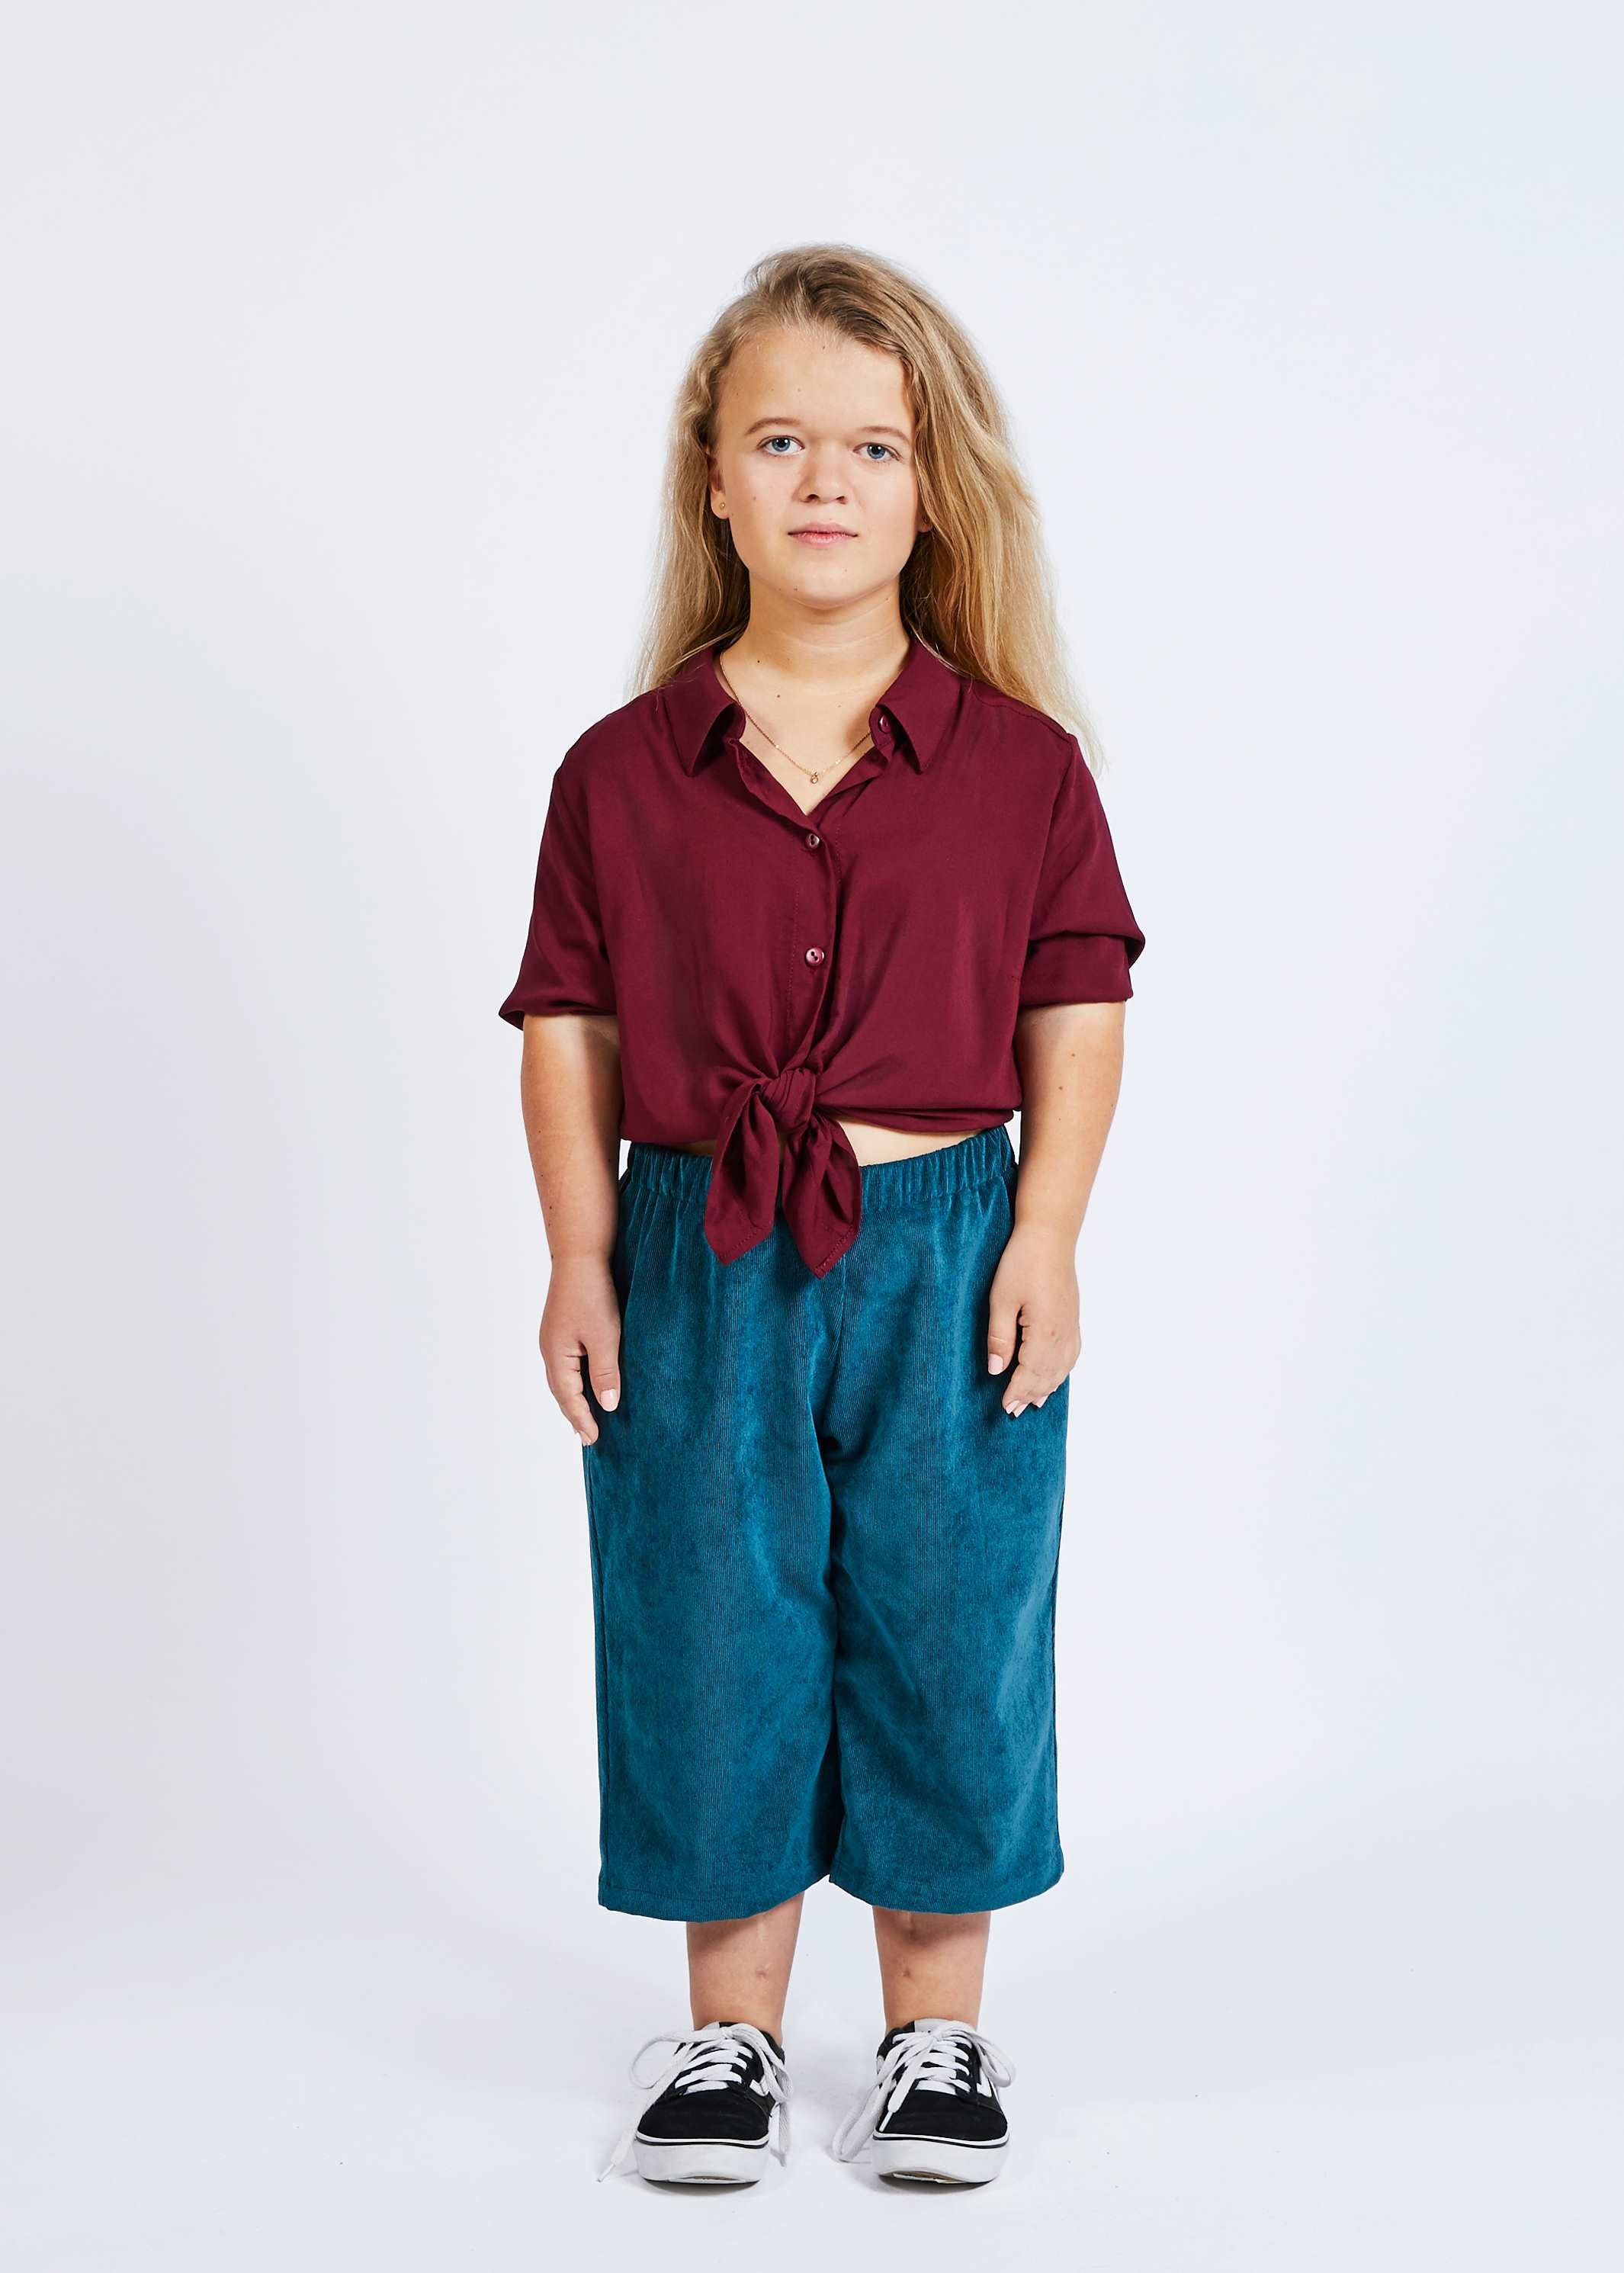 woman with dwarfism wearing corduroy blue pants with burgundy red blouse